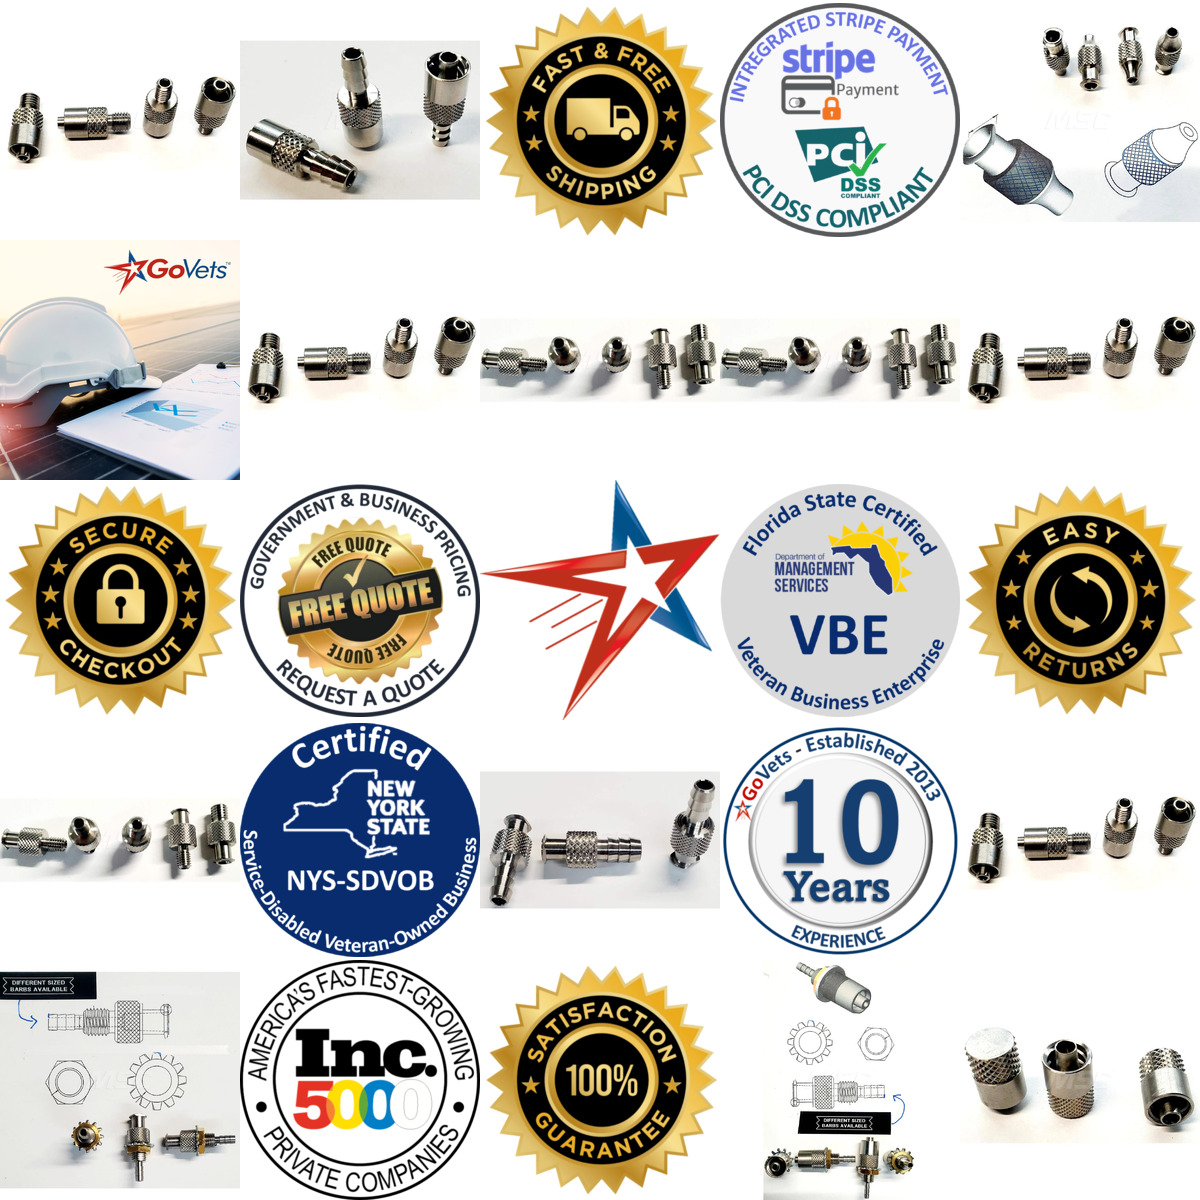 A selection of Medical Tubing Connectors and Fittings products on GoVets